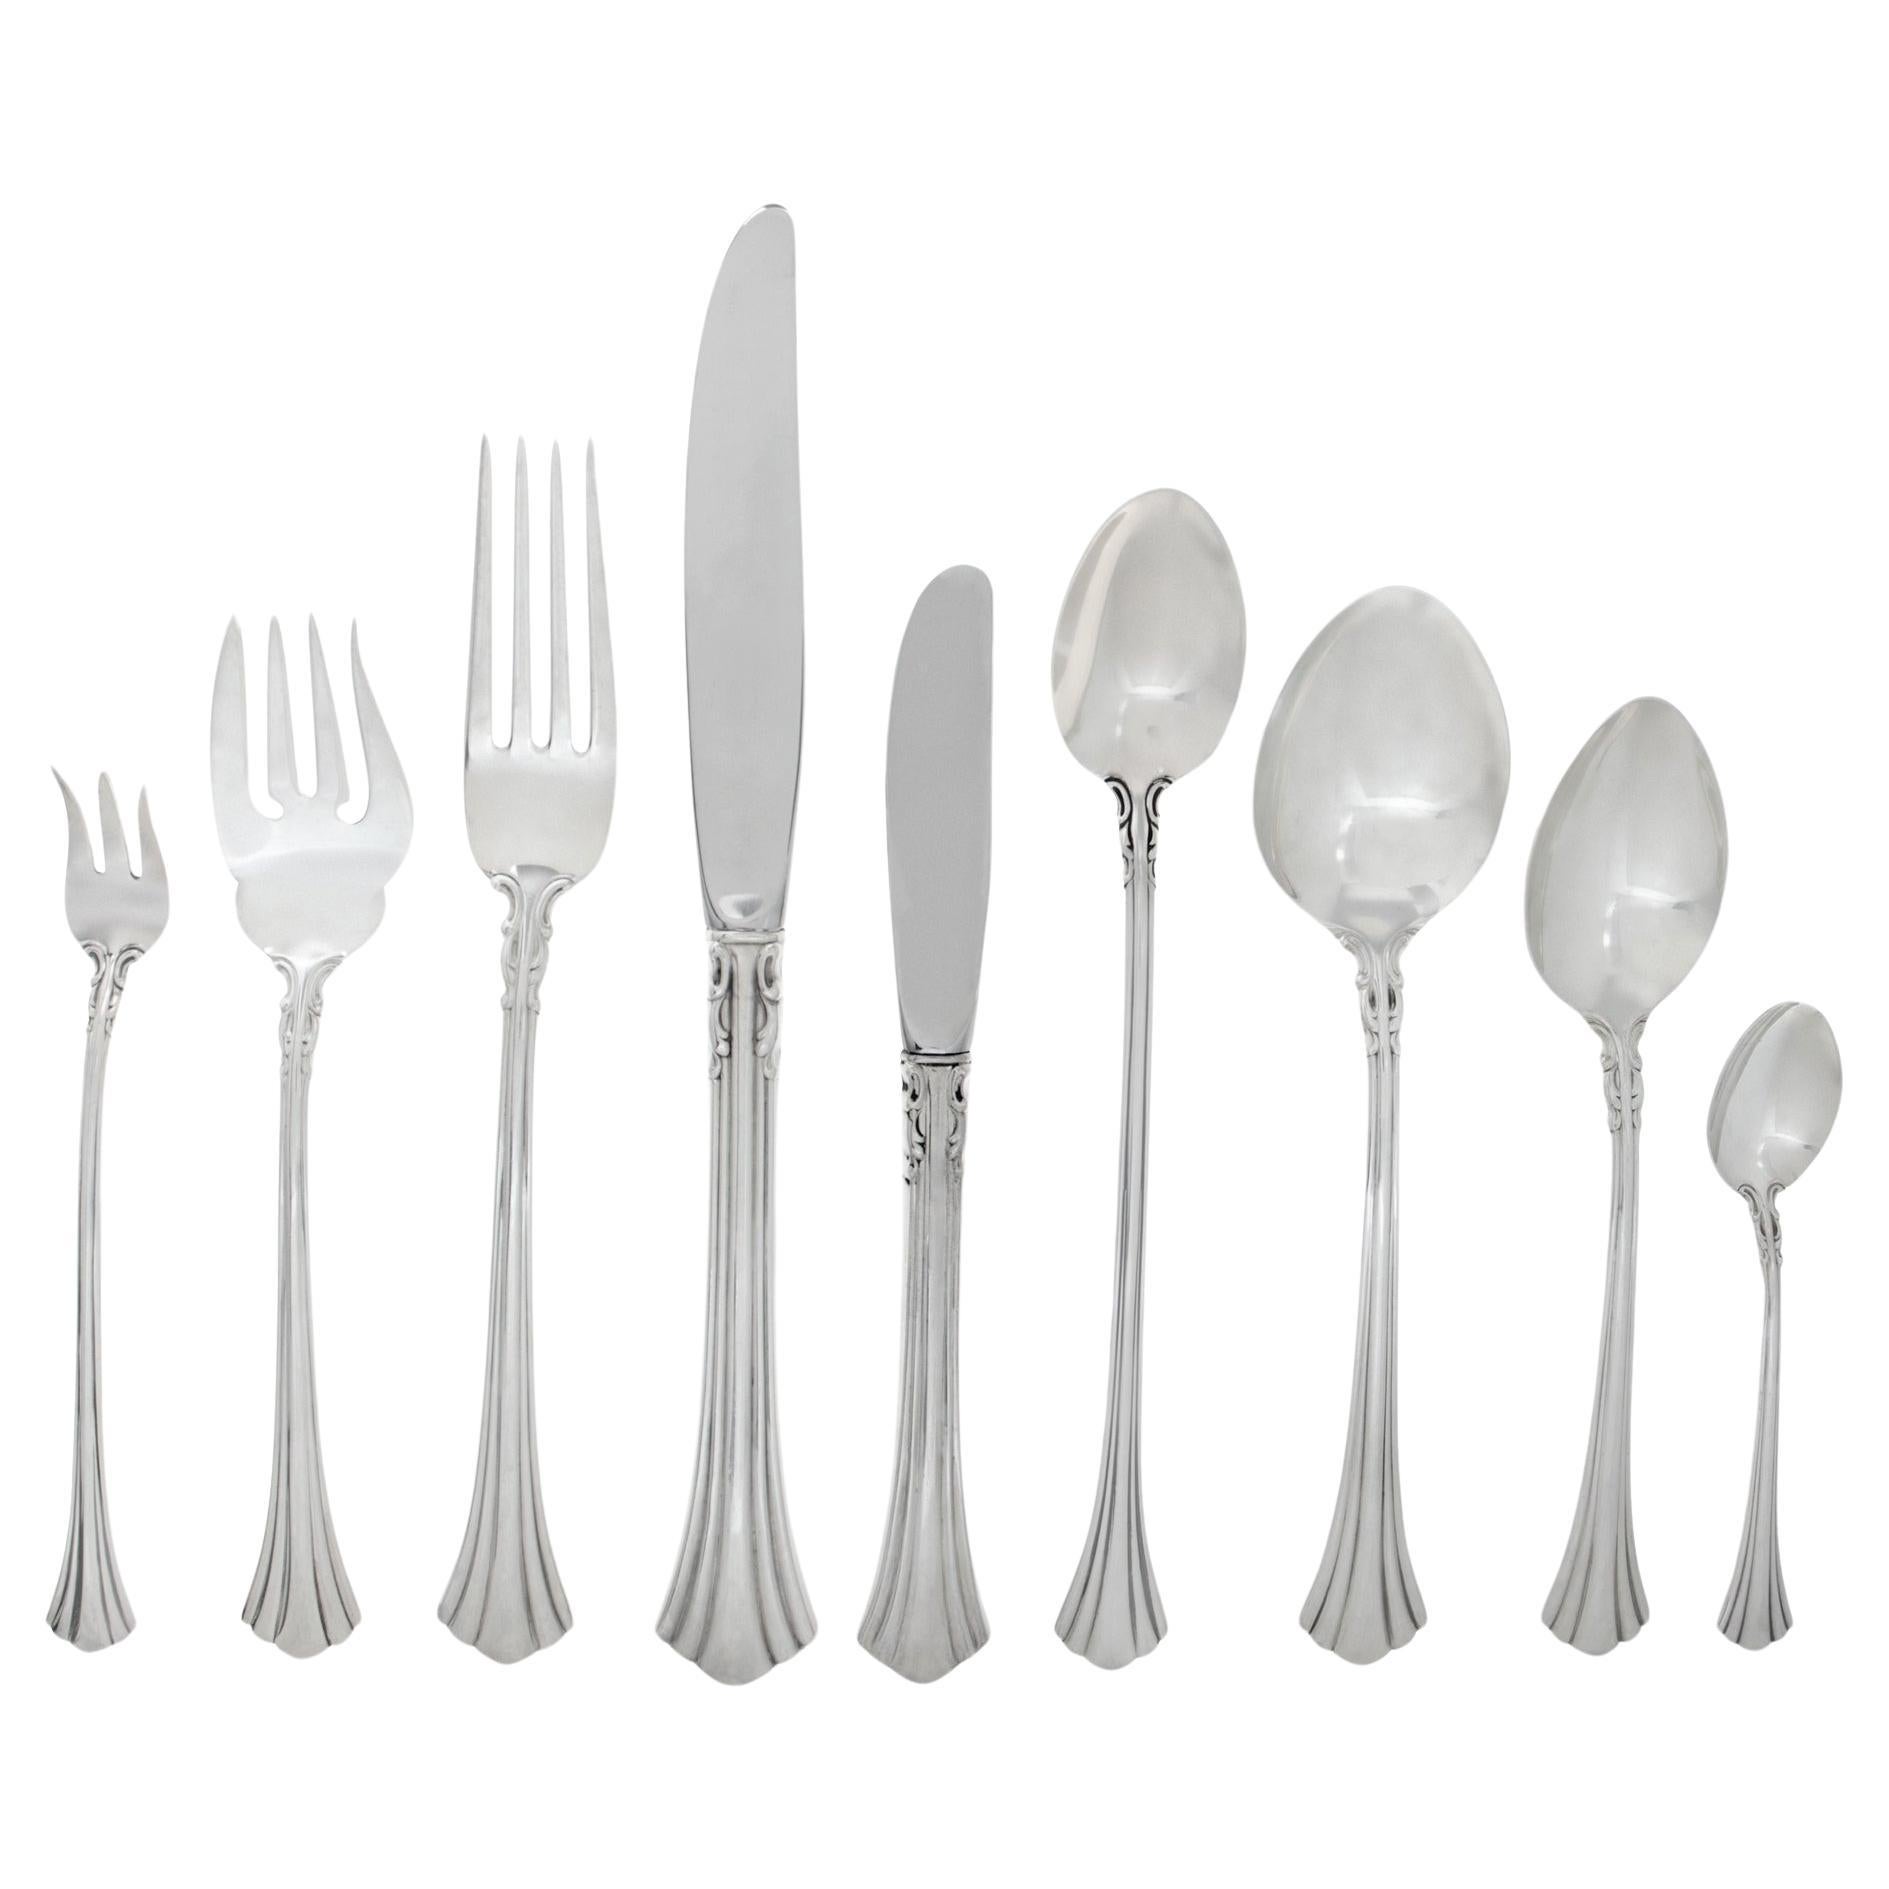 EIGHTEEN CENTURY sterling silver flatware set patented in 1971 by Reed & Barton For Sale